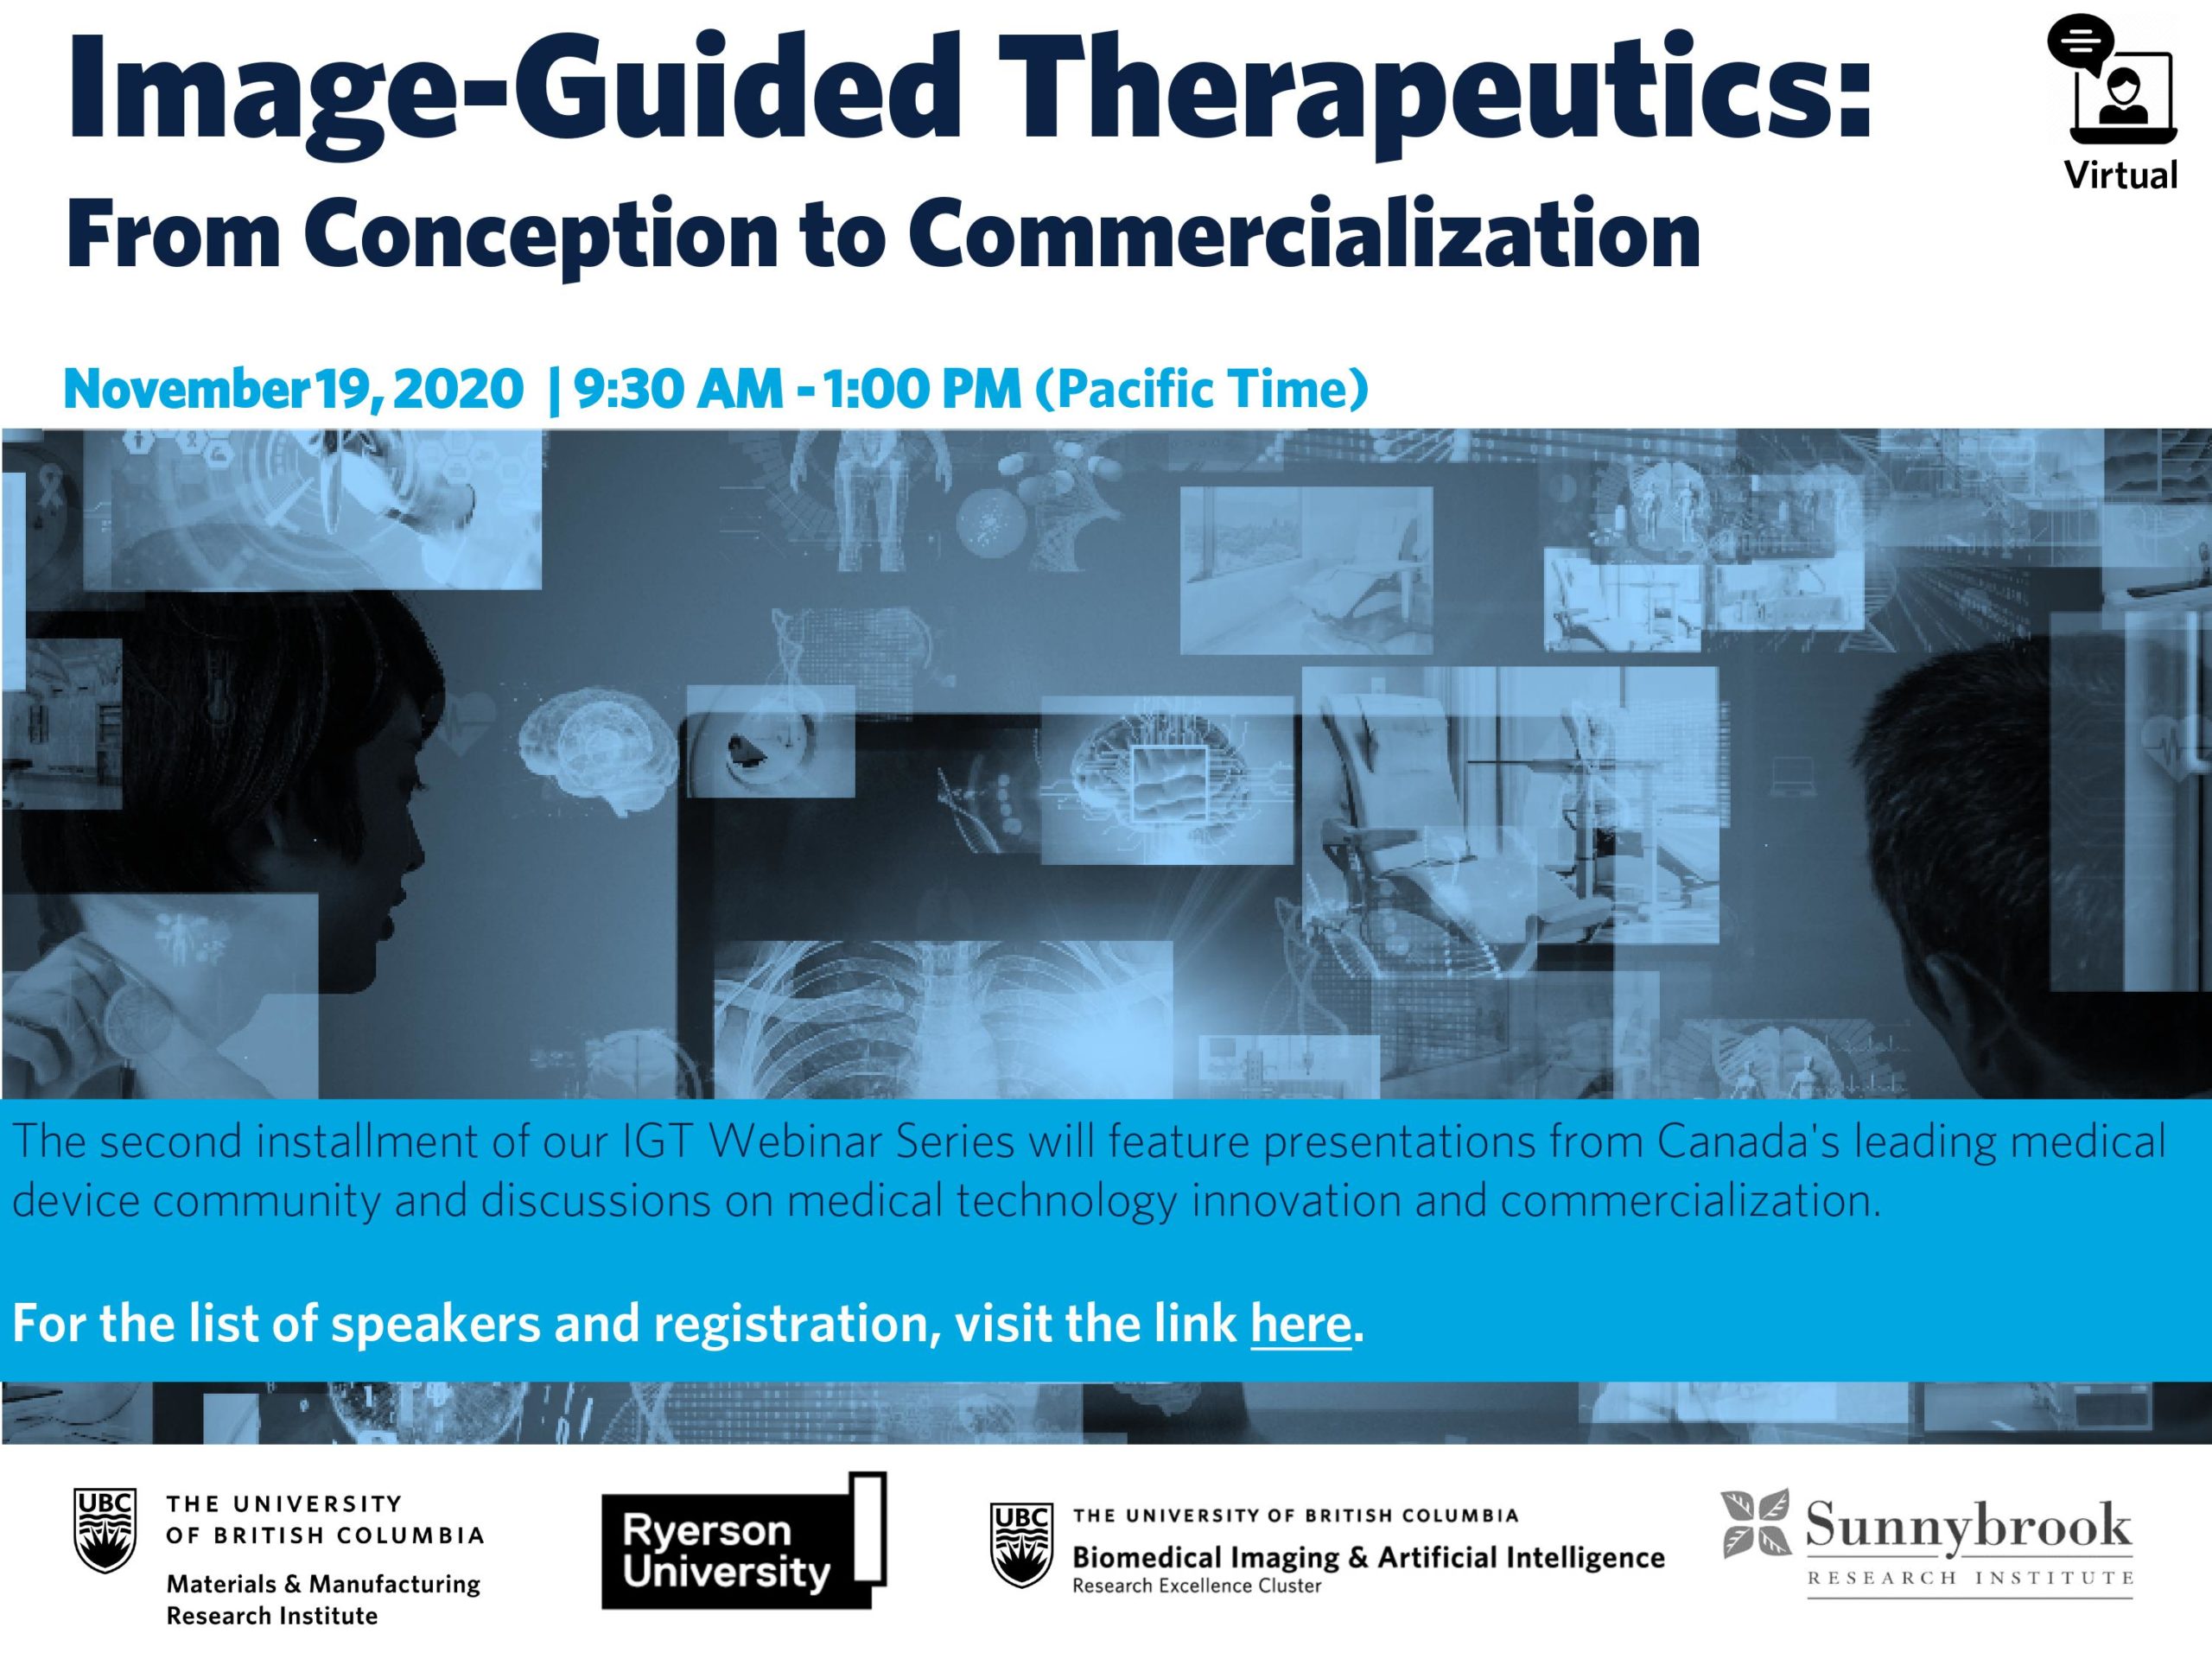 Image guided therapeutics